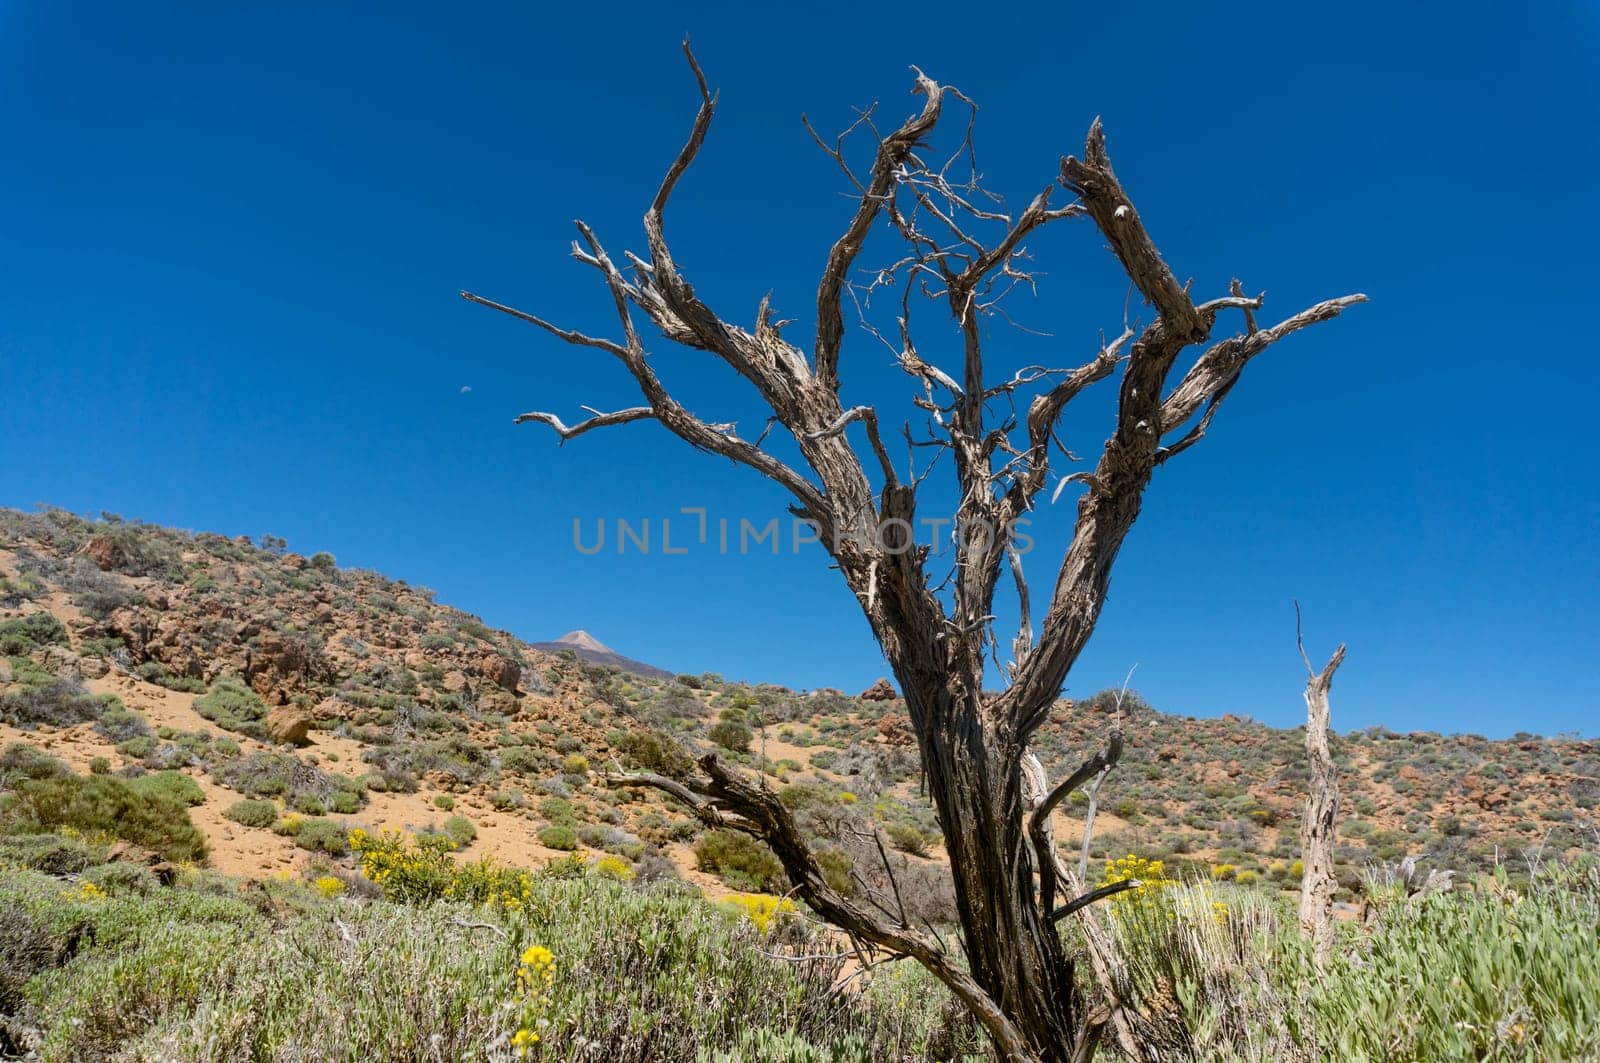 Dead tree with naked branches on blue sky background in a desert with green shrubs and sand behind. Sunny summer nature wallpaper showing climatic changes